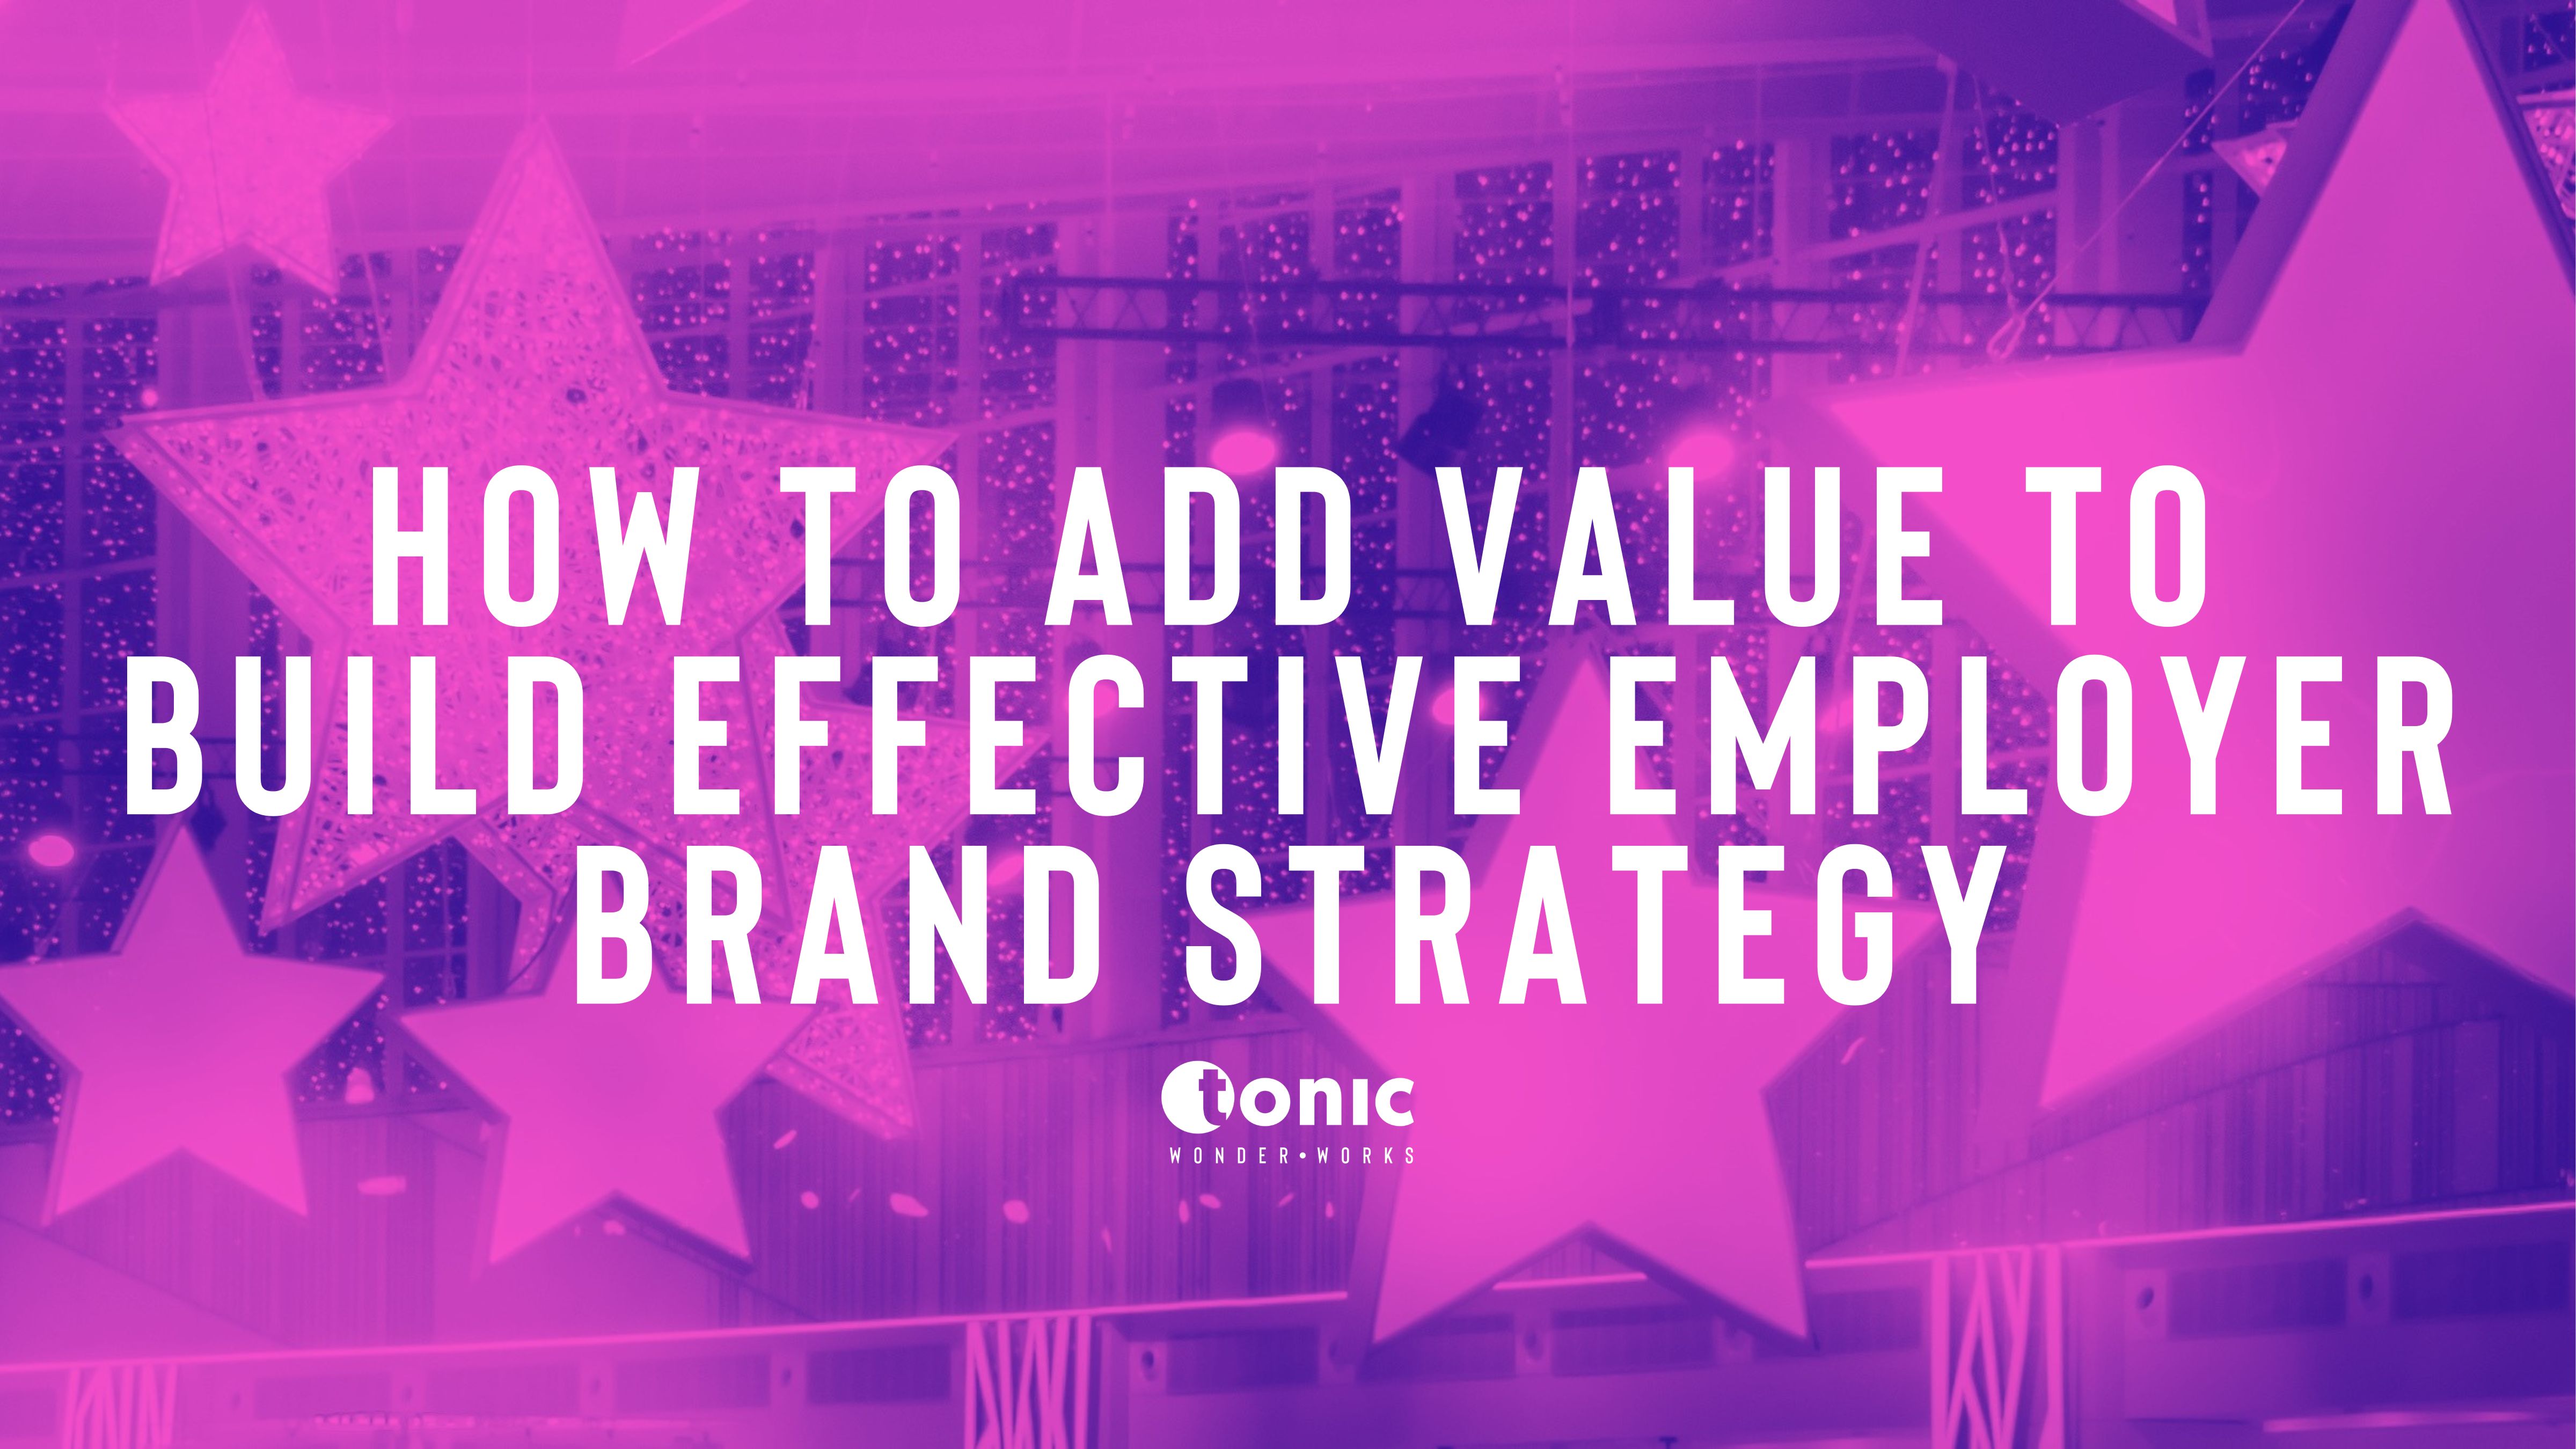 Add value to build an Effective Employer Branding Strategy